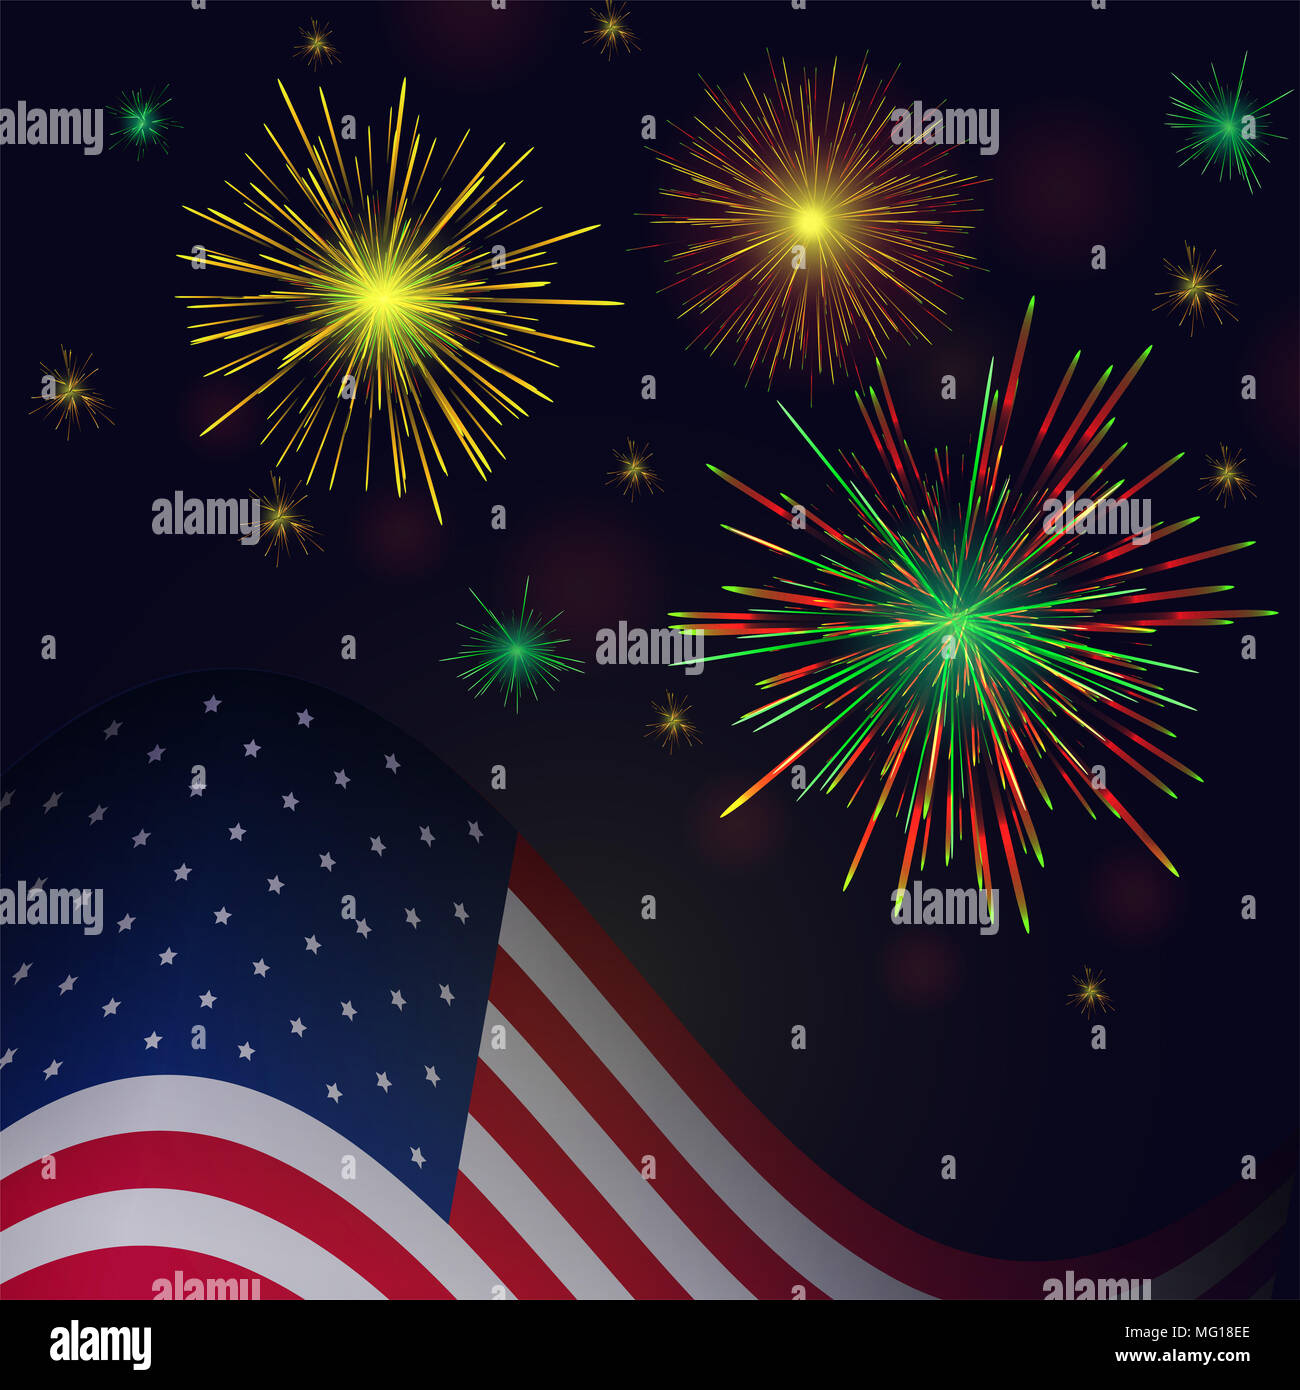 United States flag and celebration golden reg green fireworks background. Independence Day, 4th of July holidays salute greeting card. Stock Photo